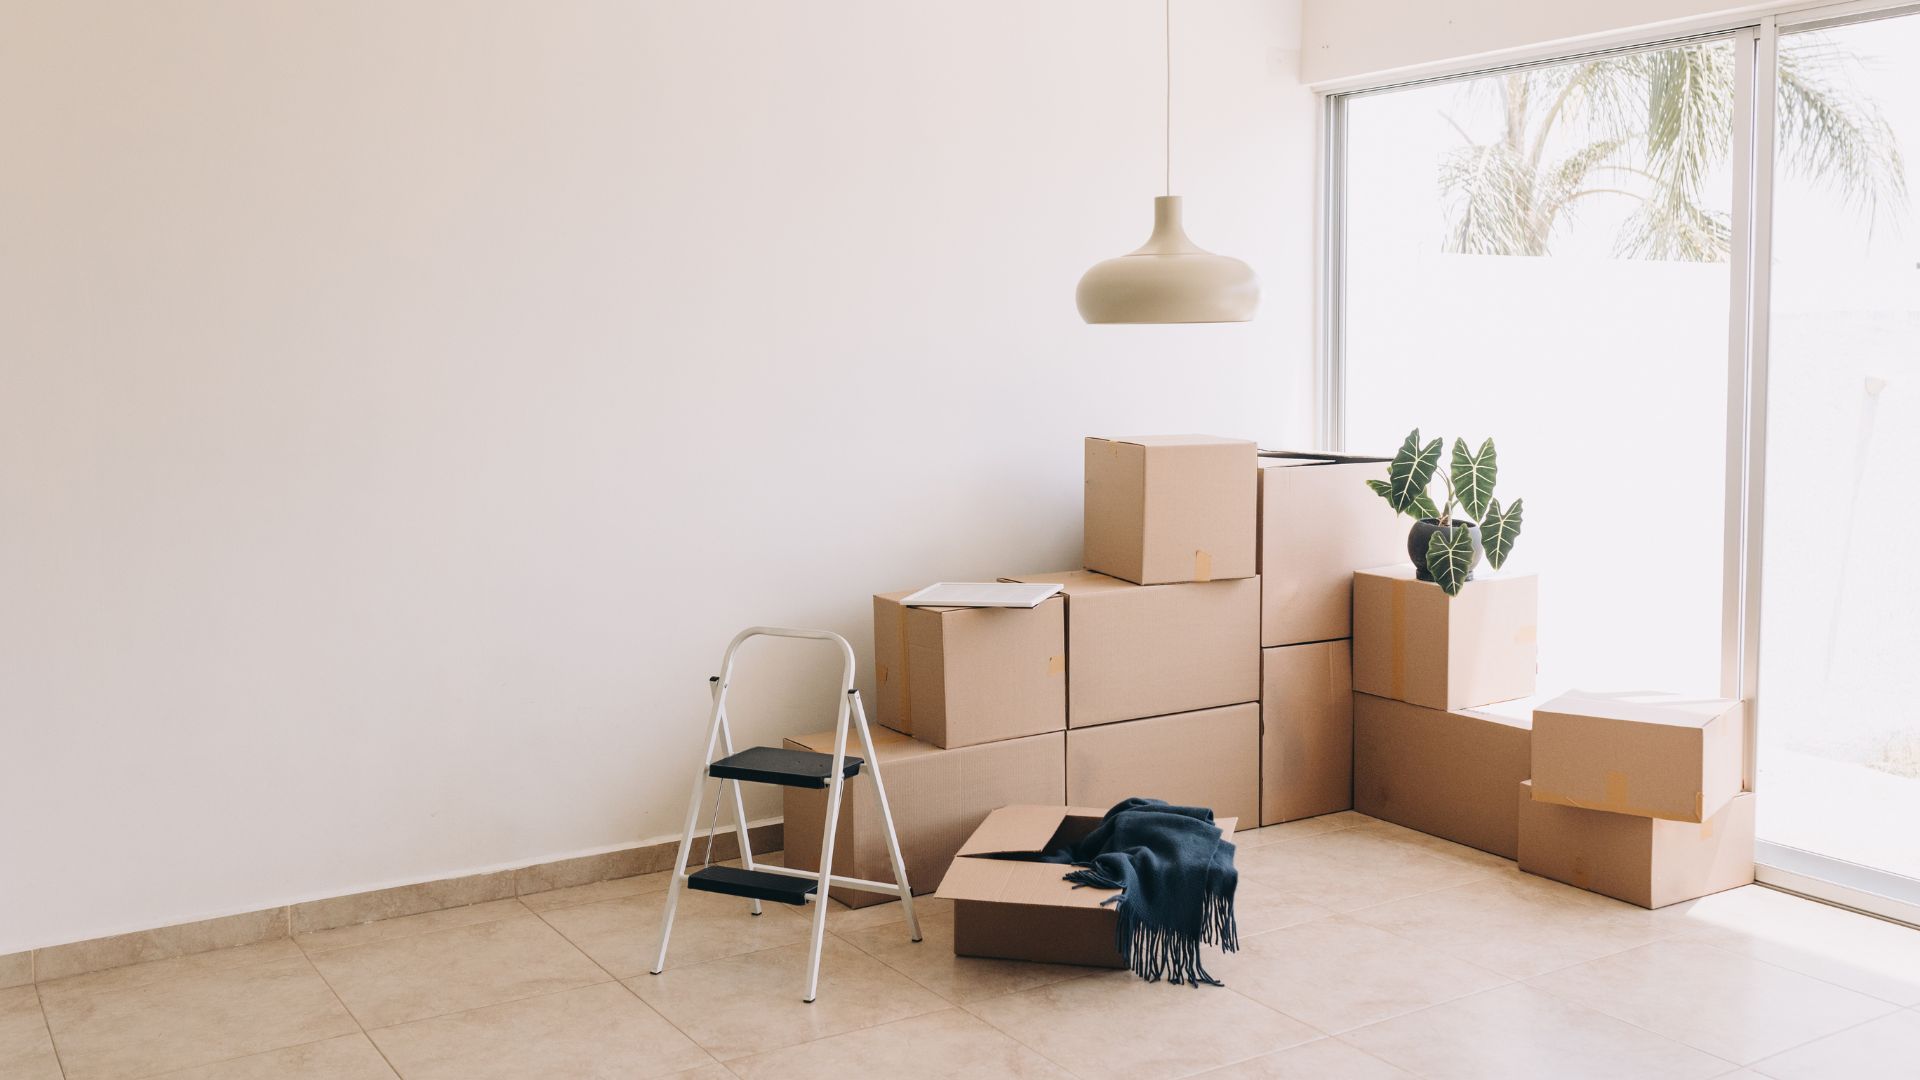 moving to a new apartment checklist